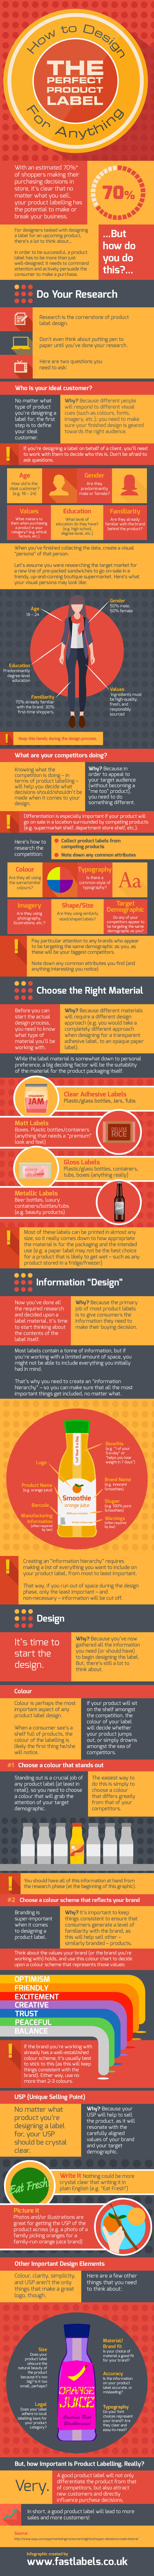 Product label design tips - infographic